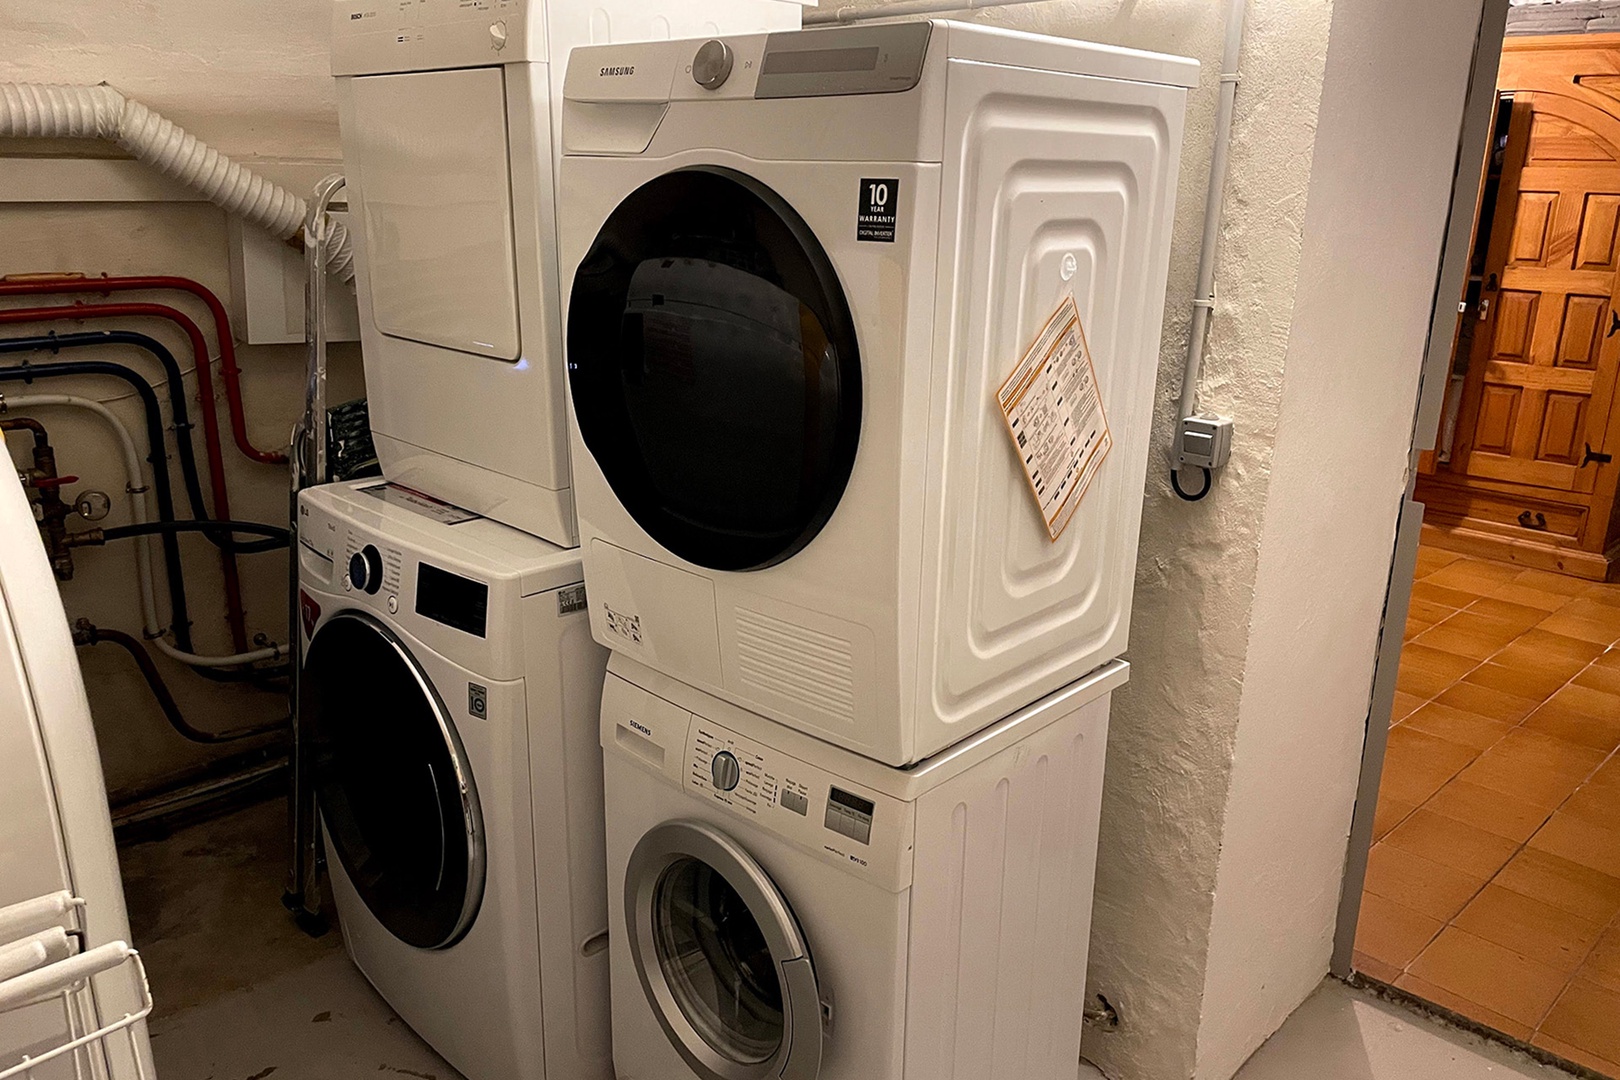 Laundry facilities located on lower level.